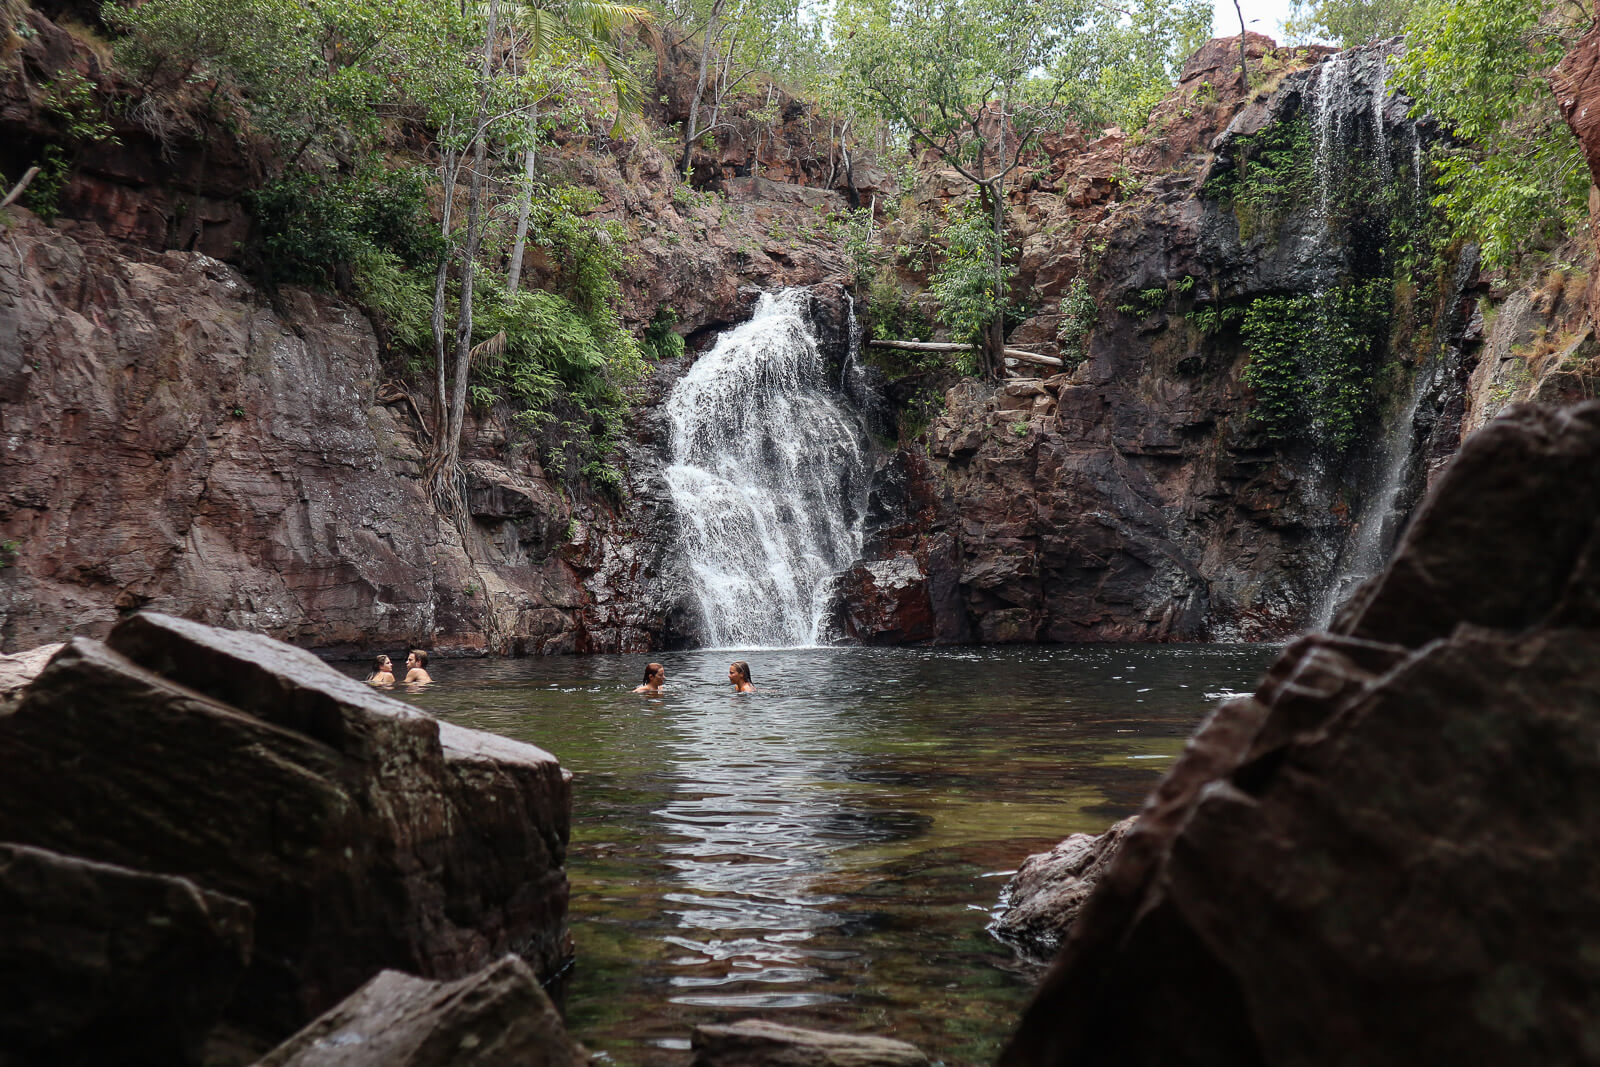 People swimming in a pool at the bottom of Florence Falls in Litchfield National Park 